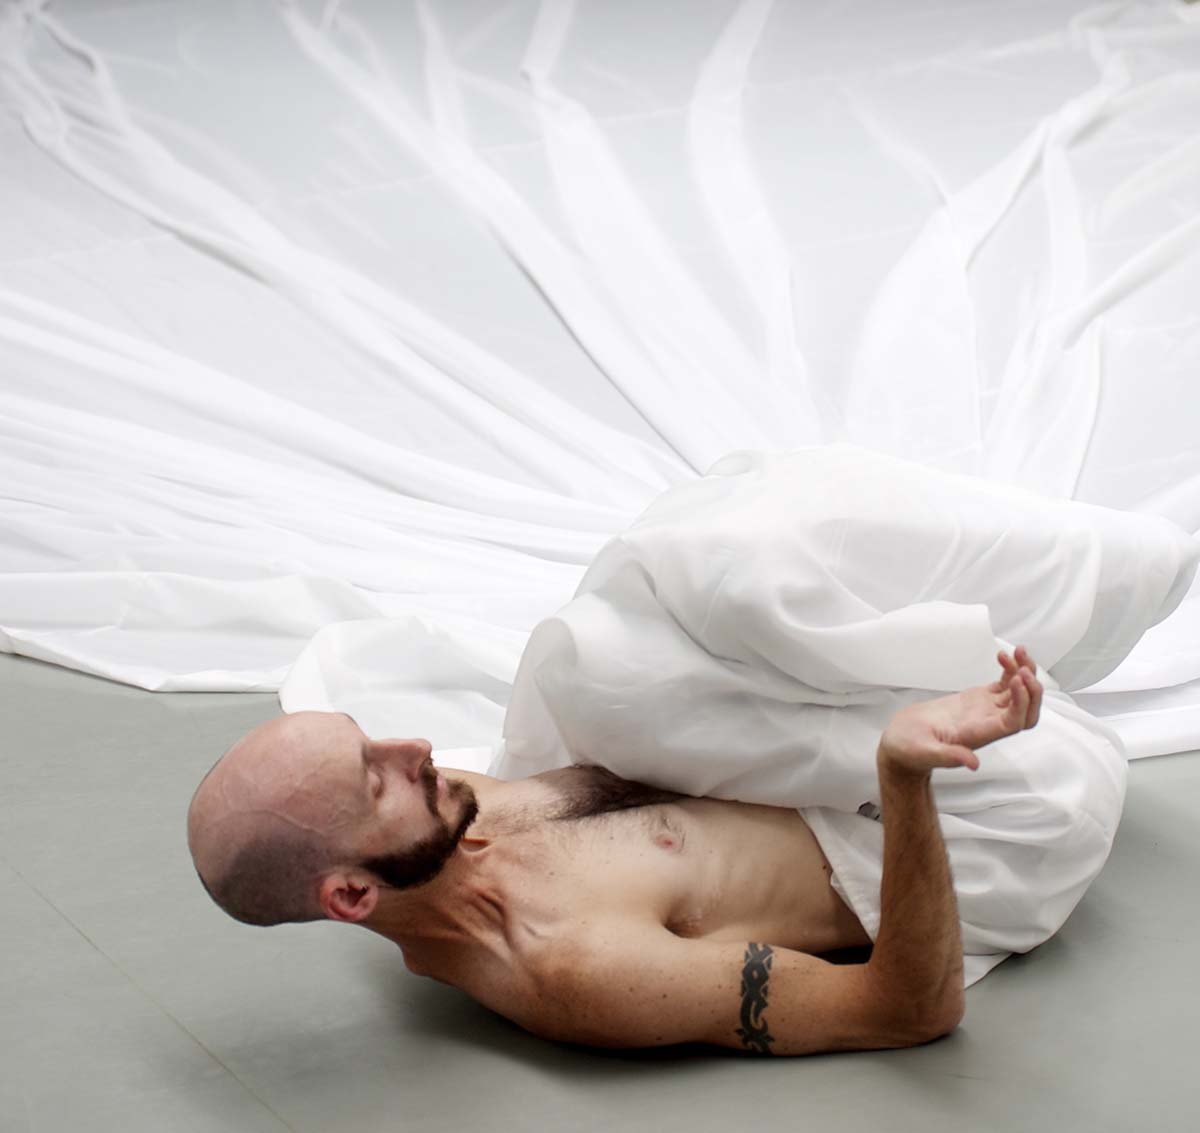 A man lies with his legs curled into his chest, a white sheet covering them and splayed out behind him. His chest is bare and he has a tattoo on his right upper arm.